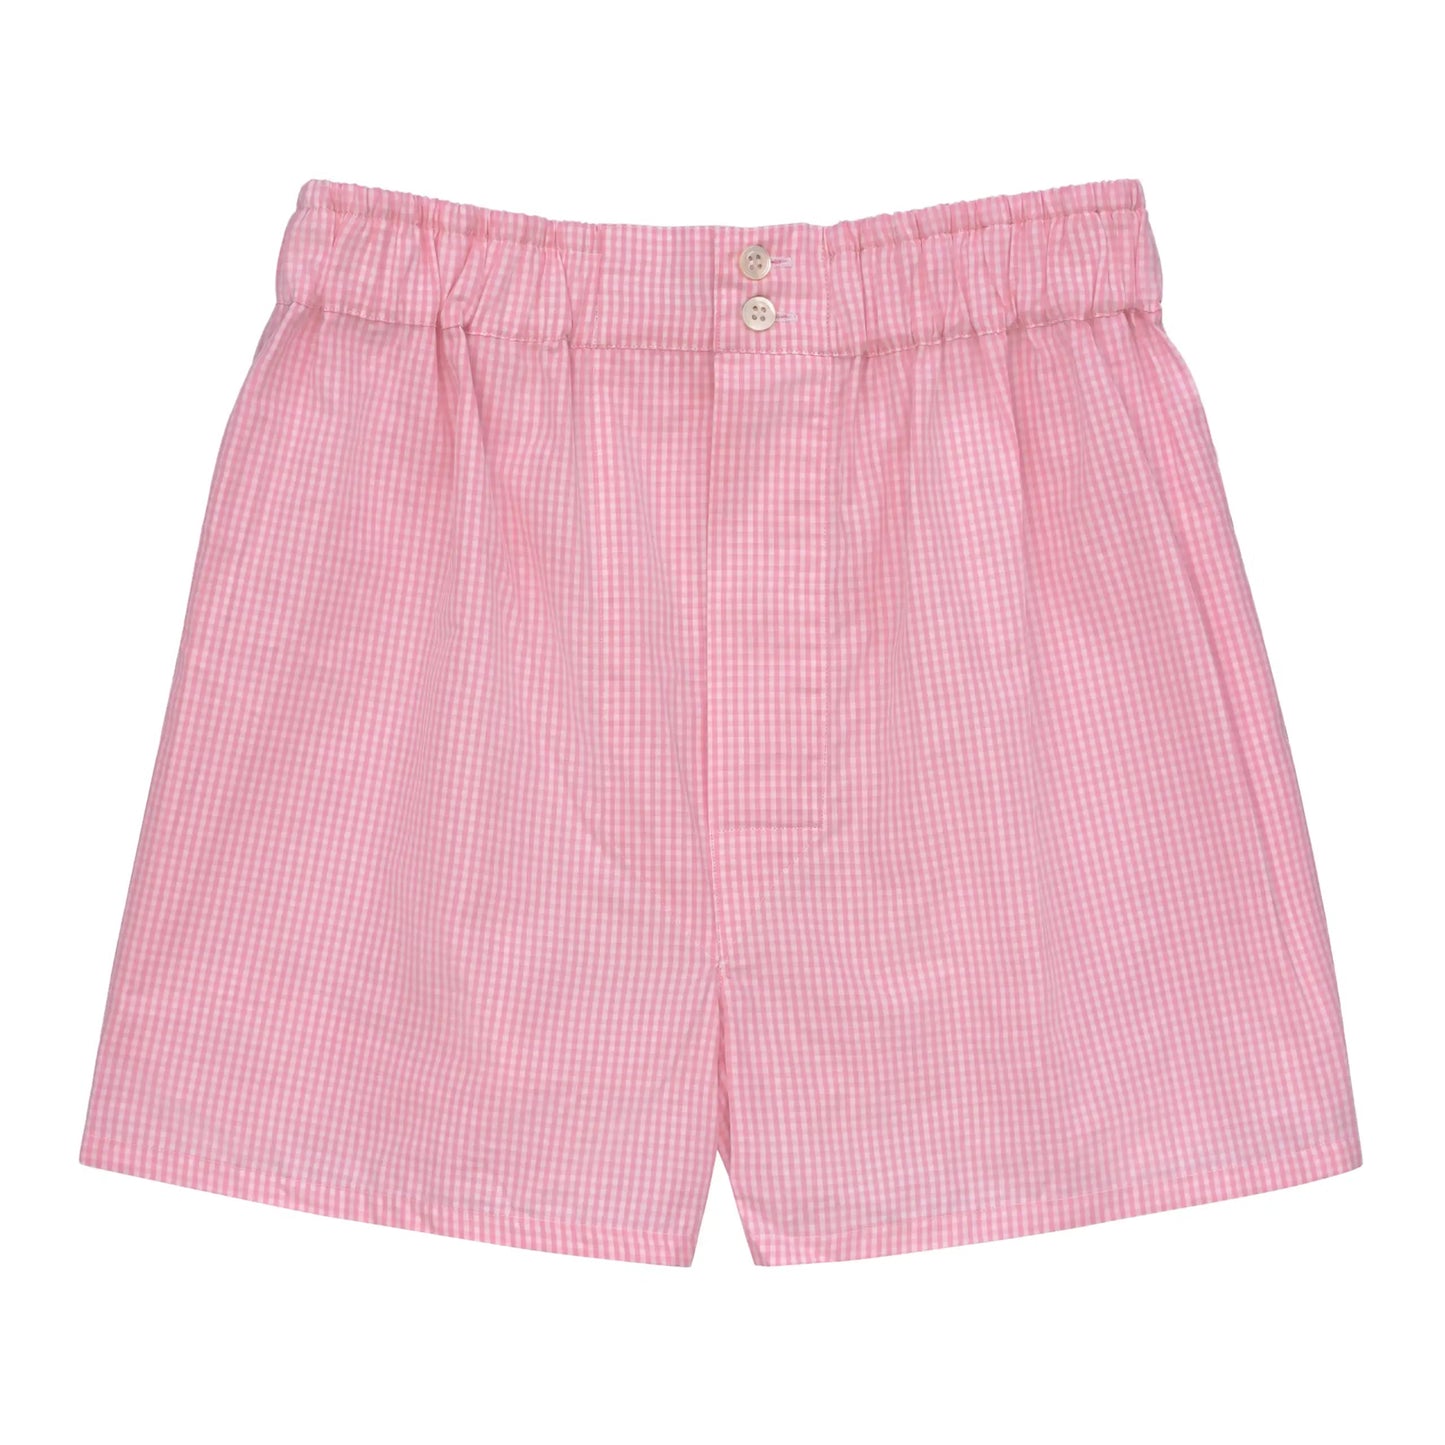 Finamore Checked Boxer Shorts in Pink and White - SARTALE